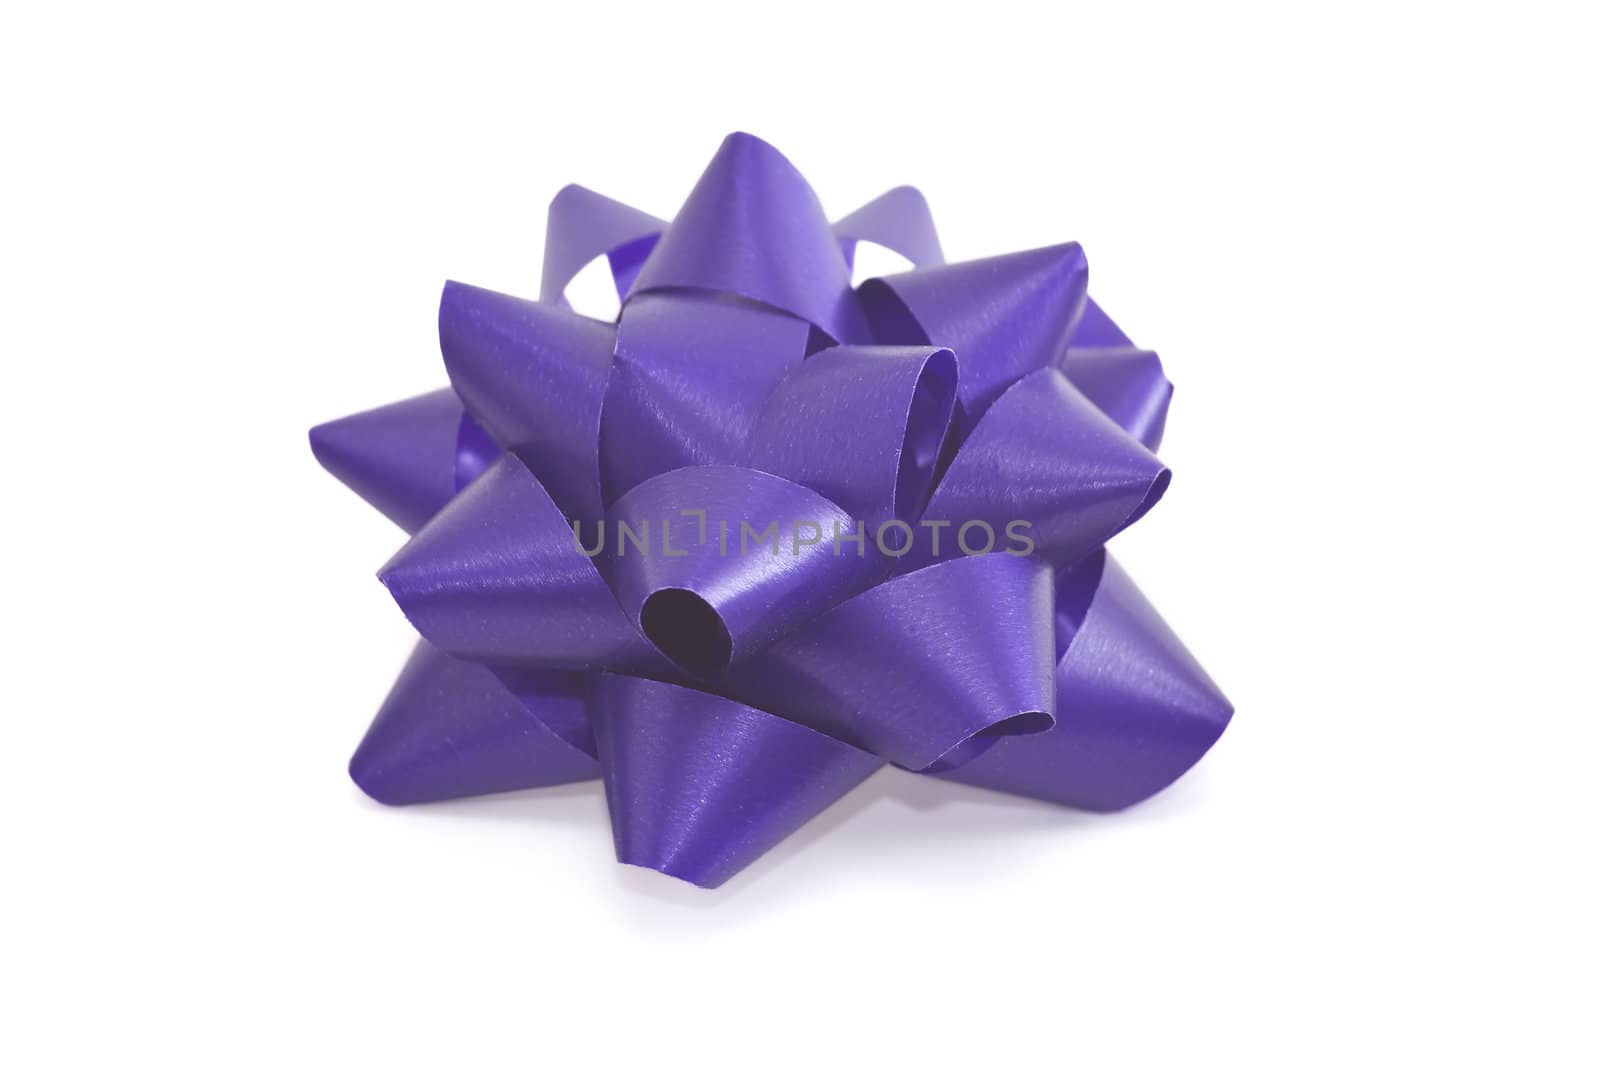 Violet bow to be used in placing on top of items - gifts, products, etc.